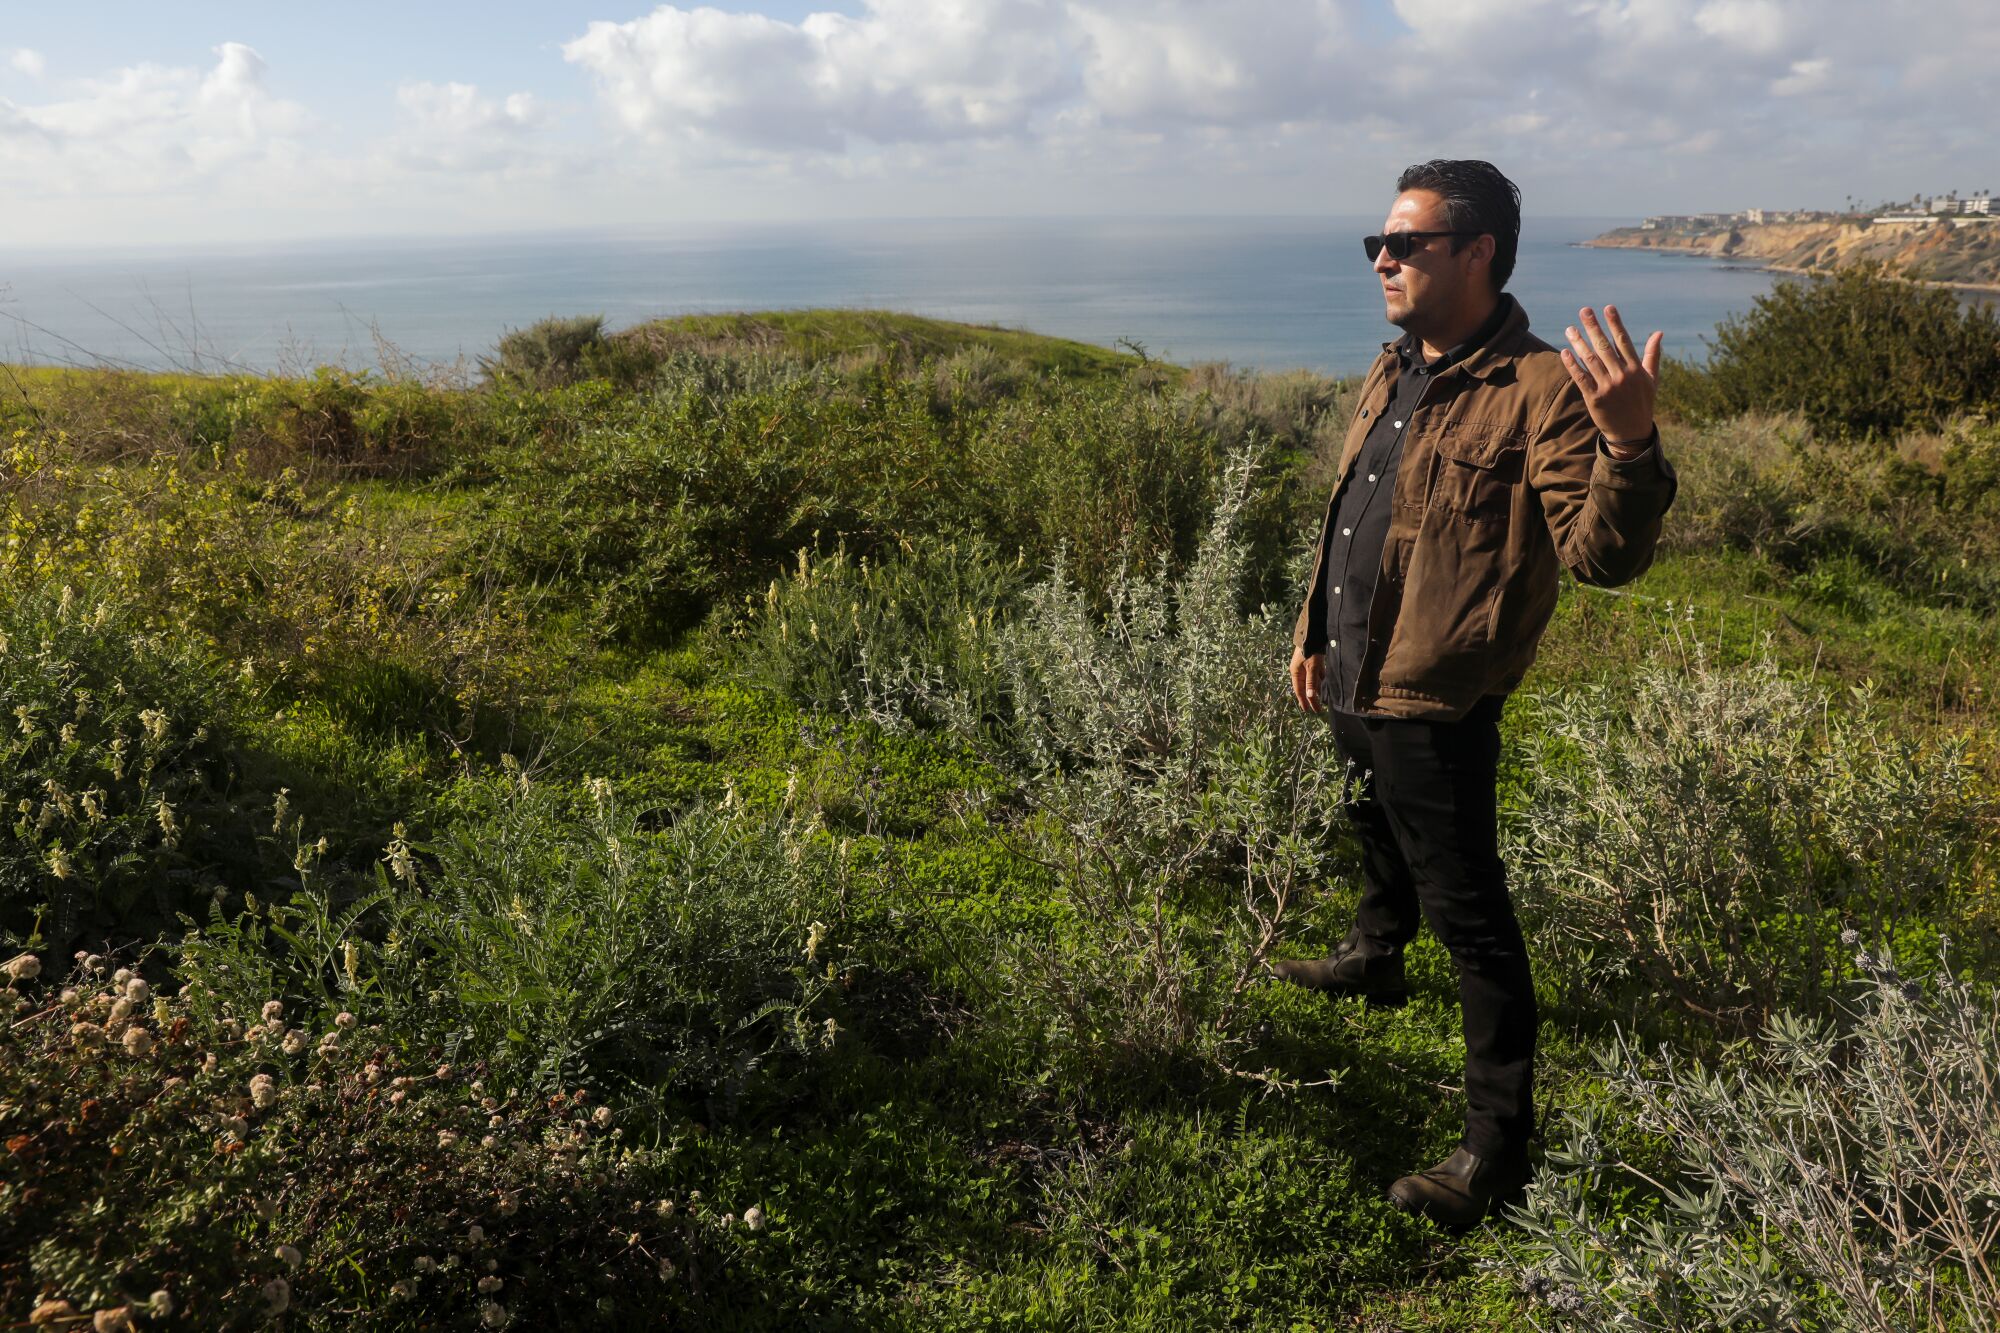 A man standing in a patch of green scrubland overlooking the ocean